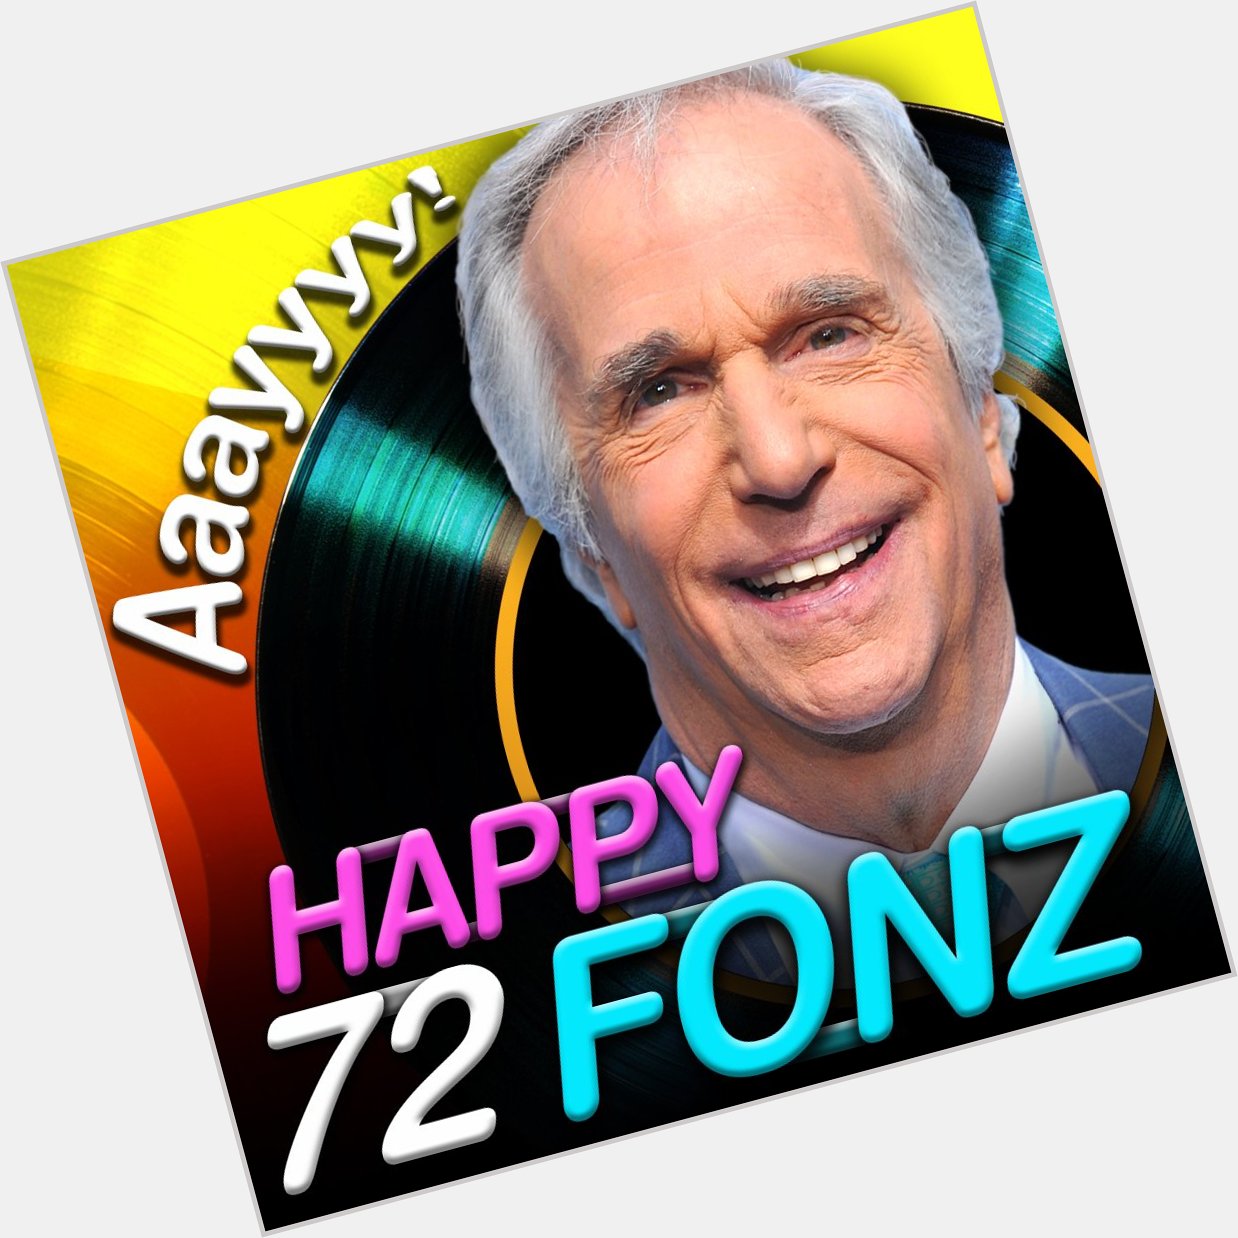 Ayyy! Two thumbs up for the birthday boy... Happy 72nd Birthday to Henry Winkler! 